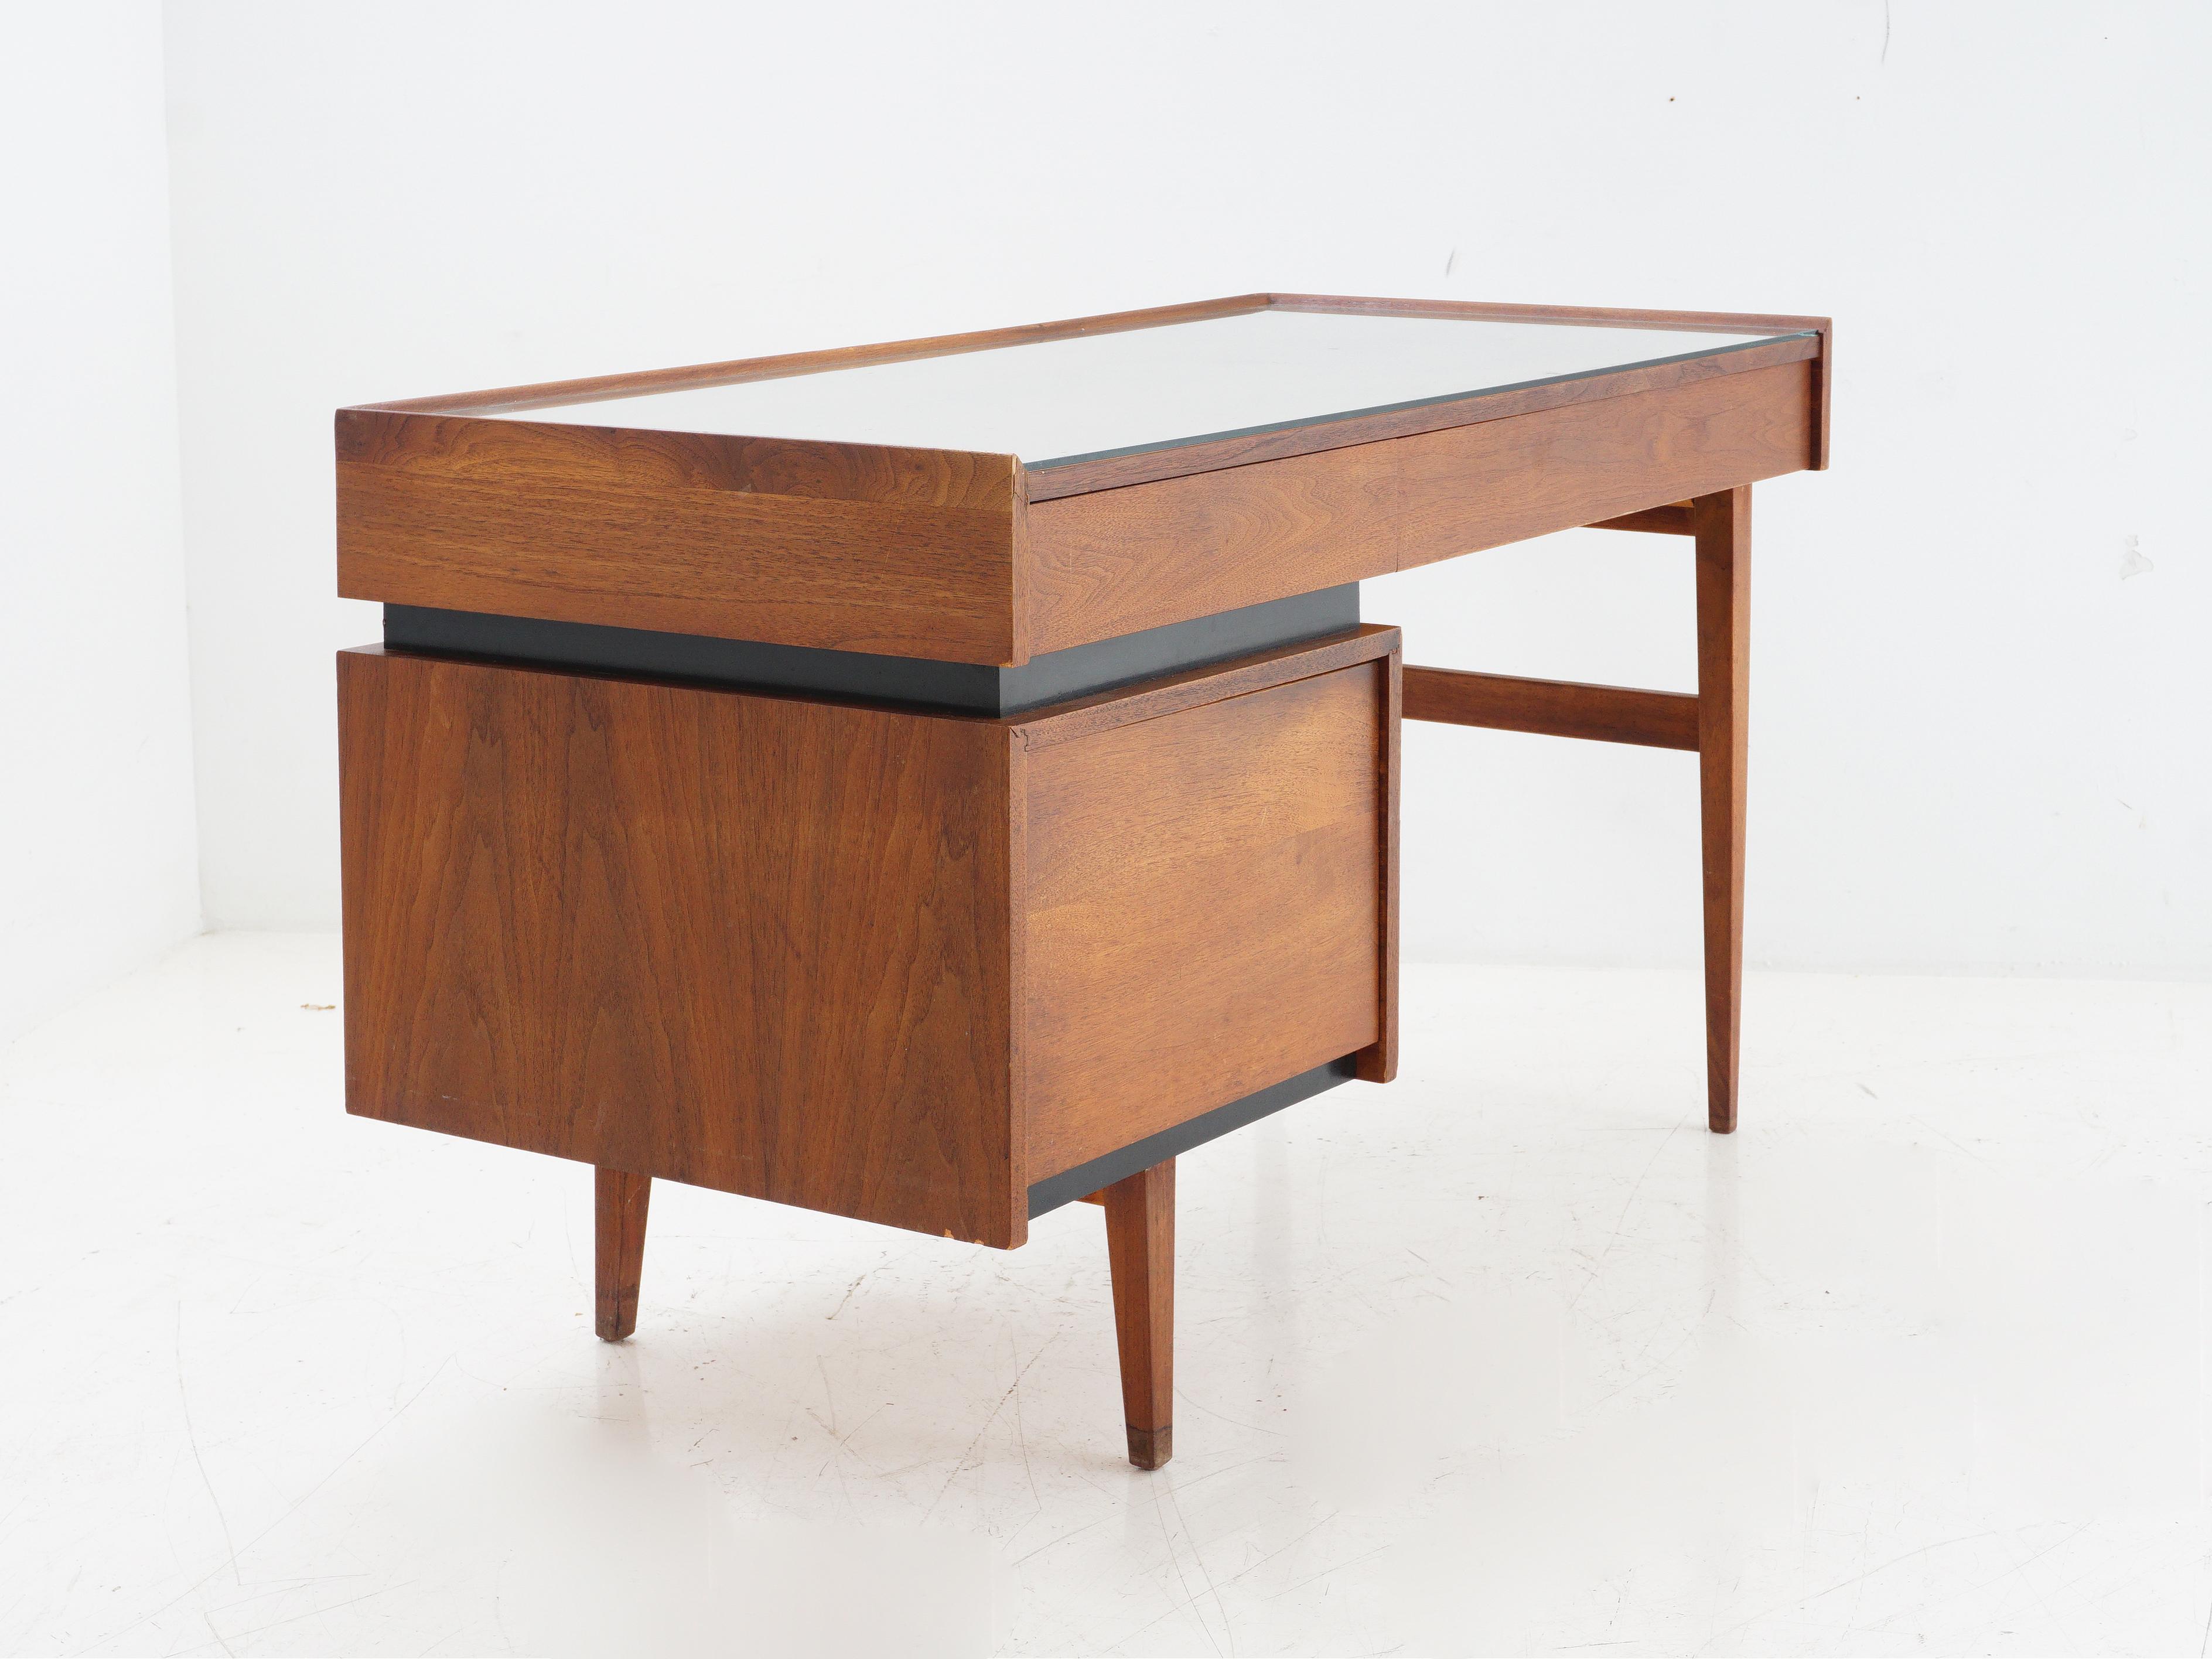 Let's get down to business with this walnut desk, designed by Merton Gershun for Dillingham Furniture - where mid-century modern meets early Monday meetings. Transform your office into a  den of productivity, because conquering deadlines should